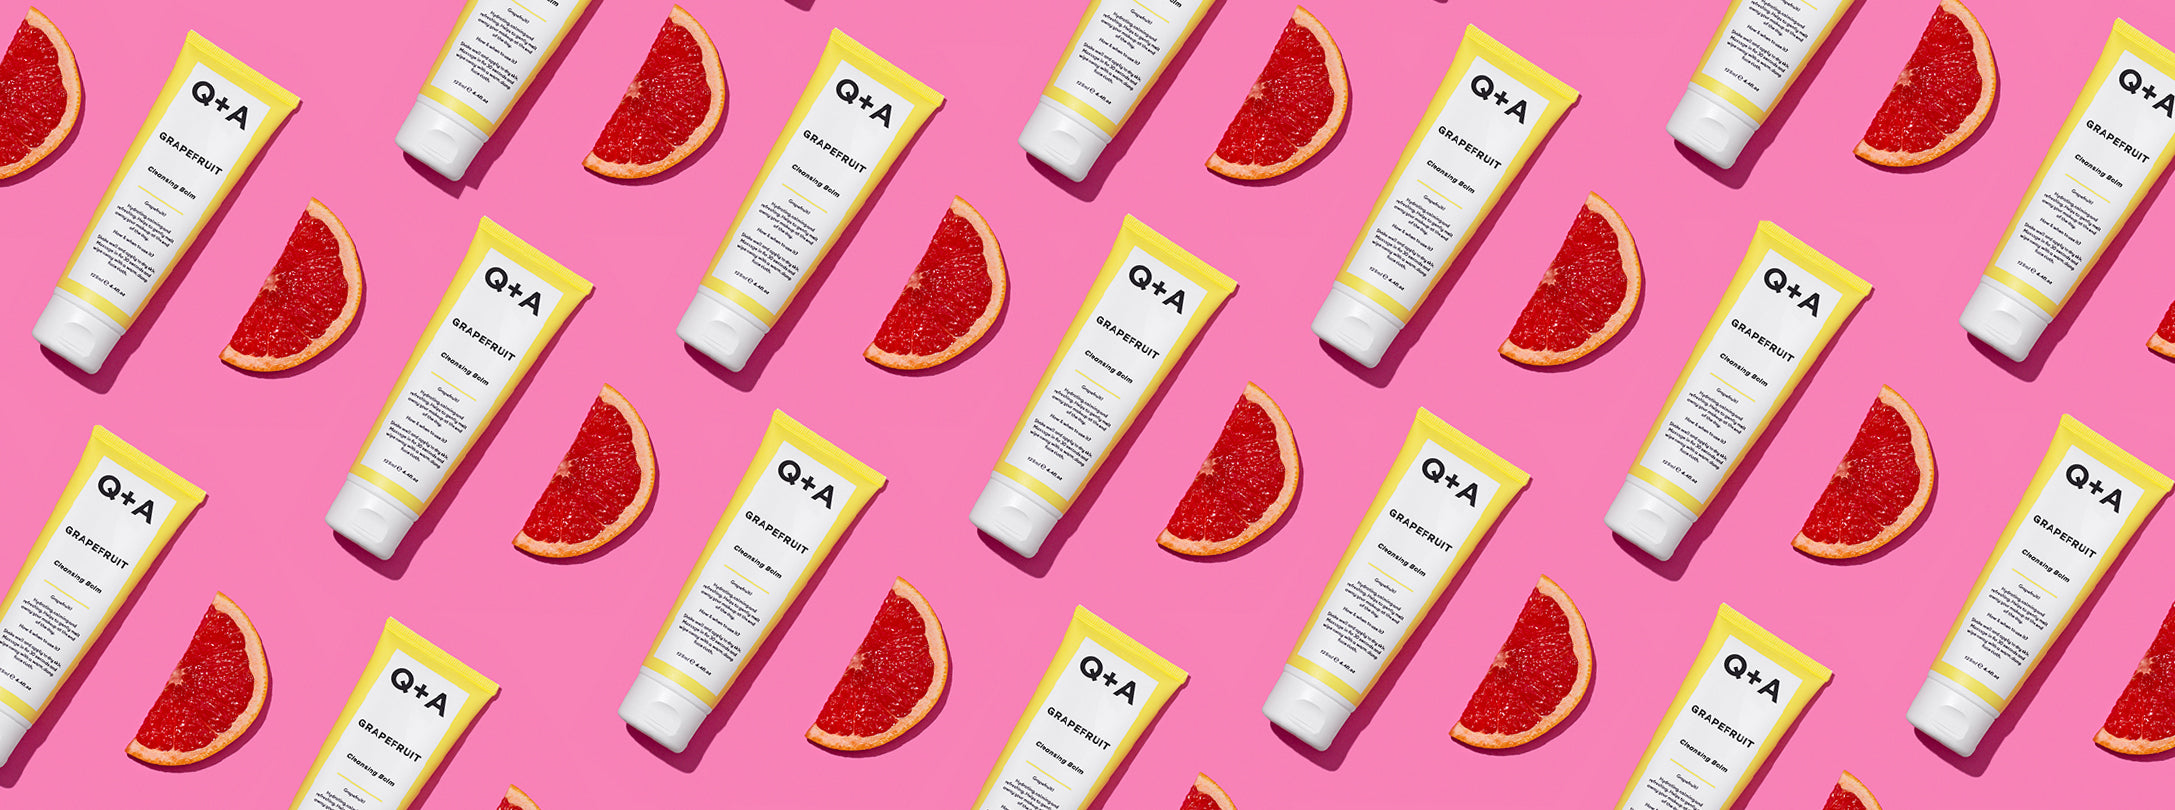 Q+A Dry Skin Collection